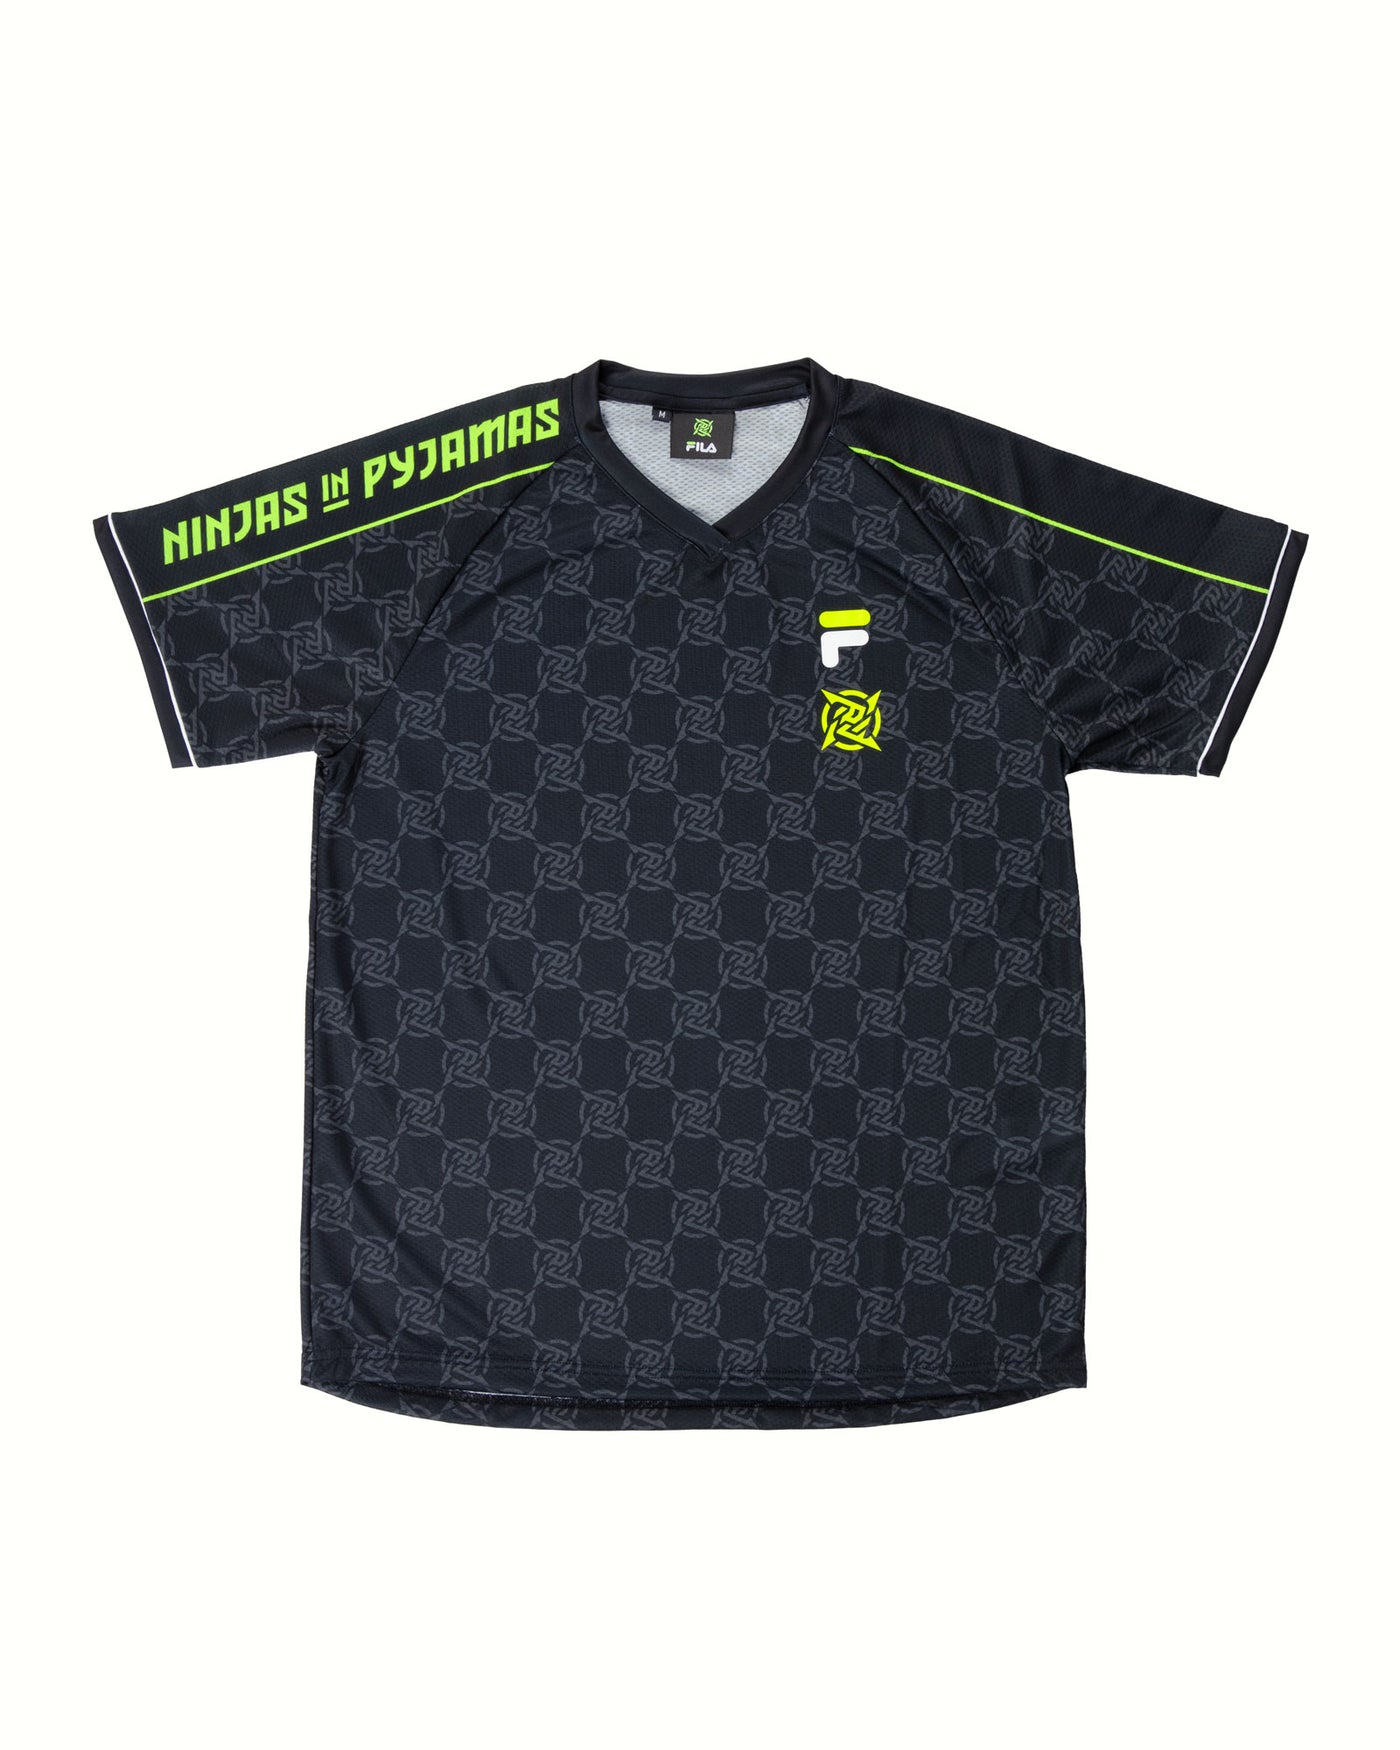 Shinobi Shozoku - NIPxFILA Jersey, a merch collaboration between Ninjas in Pyjamas and FILA. This sleek and stylish jersey showcases the logos of both brands, making it the perfect choice for NIP fans who want to express their passion for the team and fashion in a unique and trendy way.